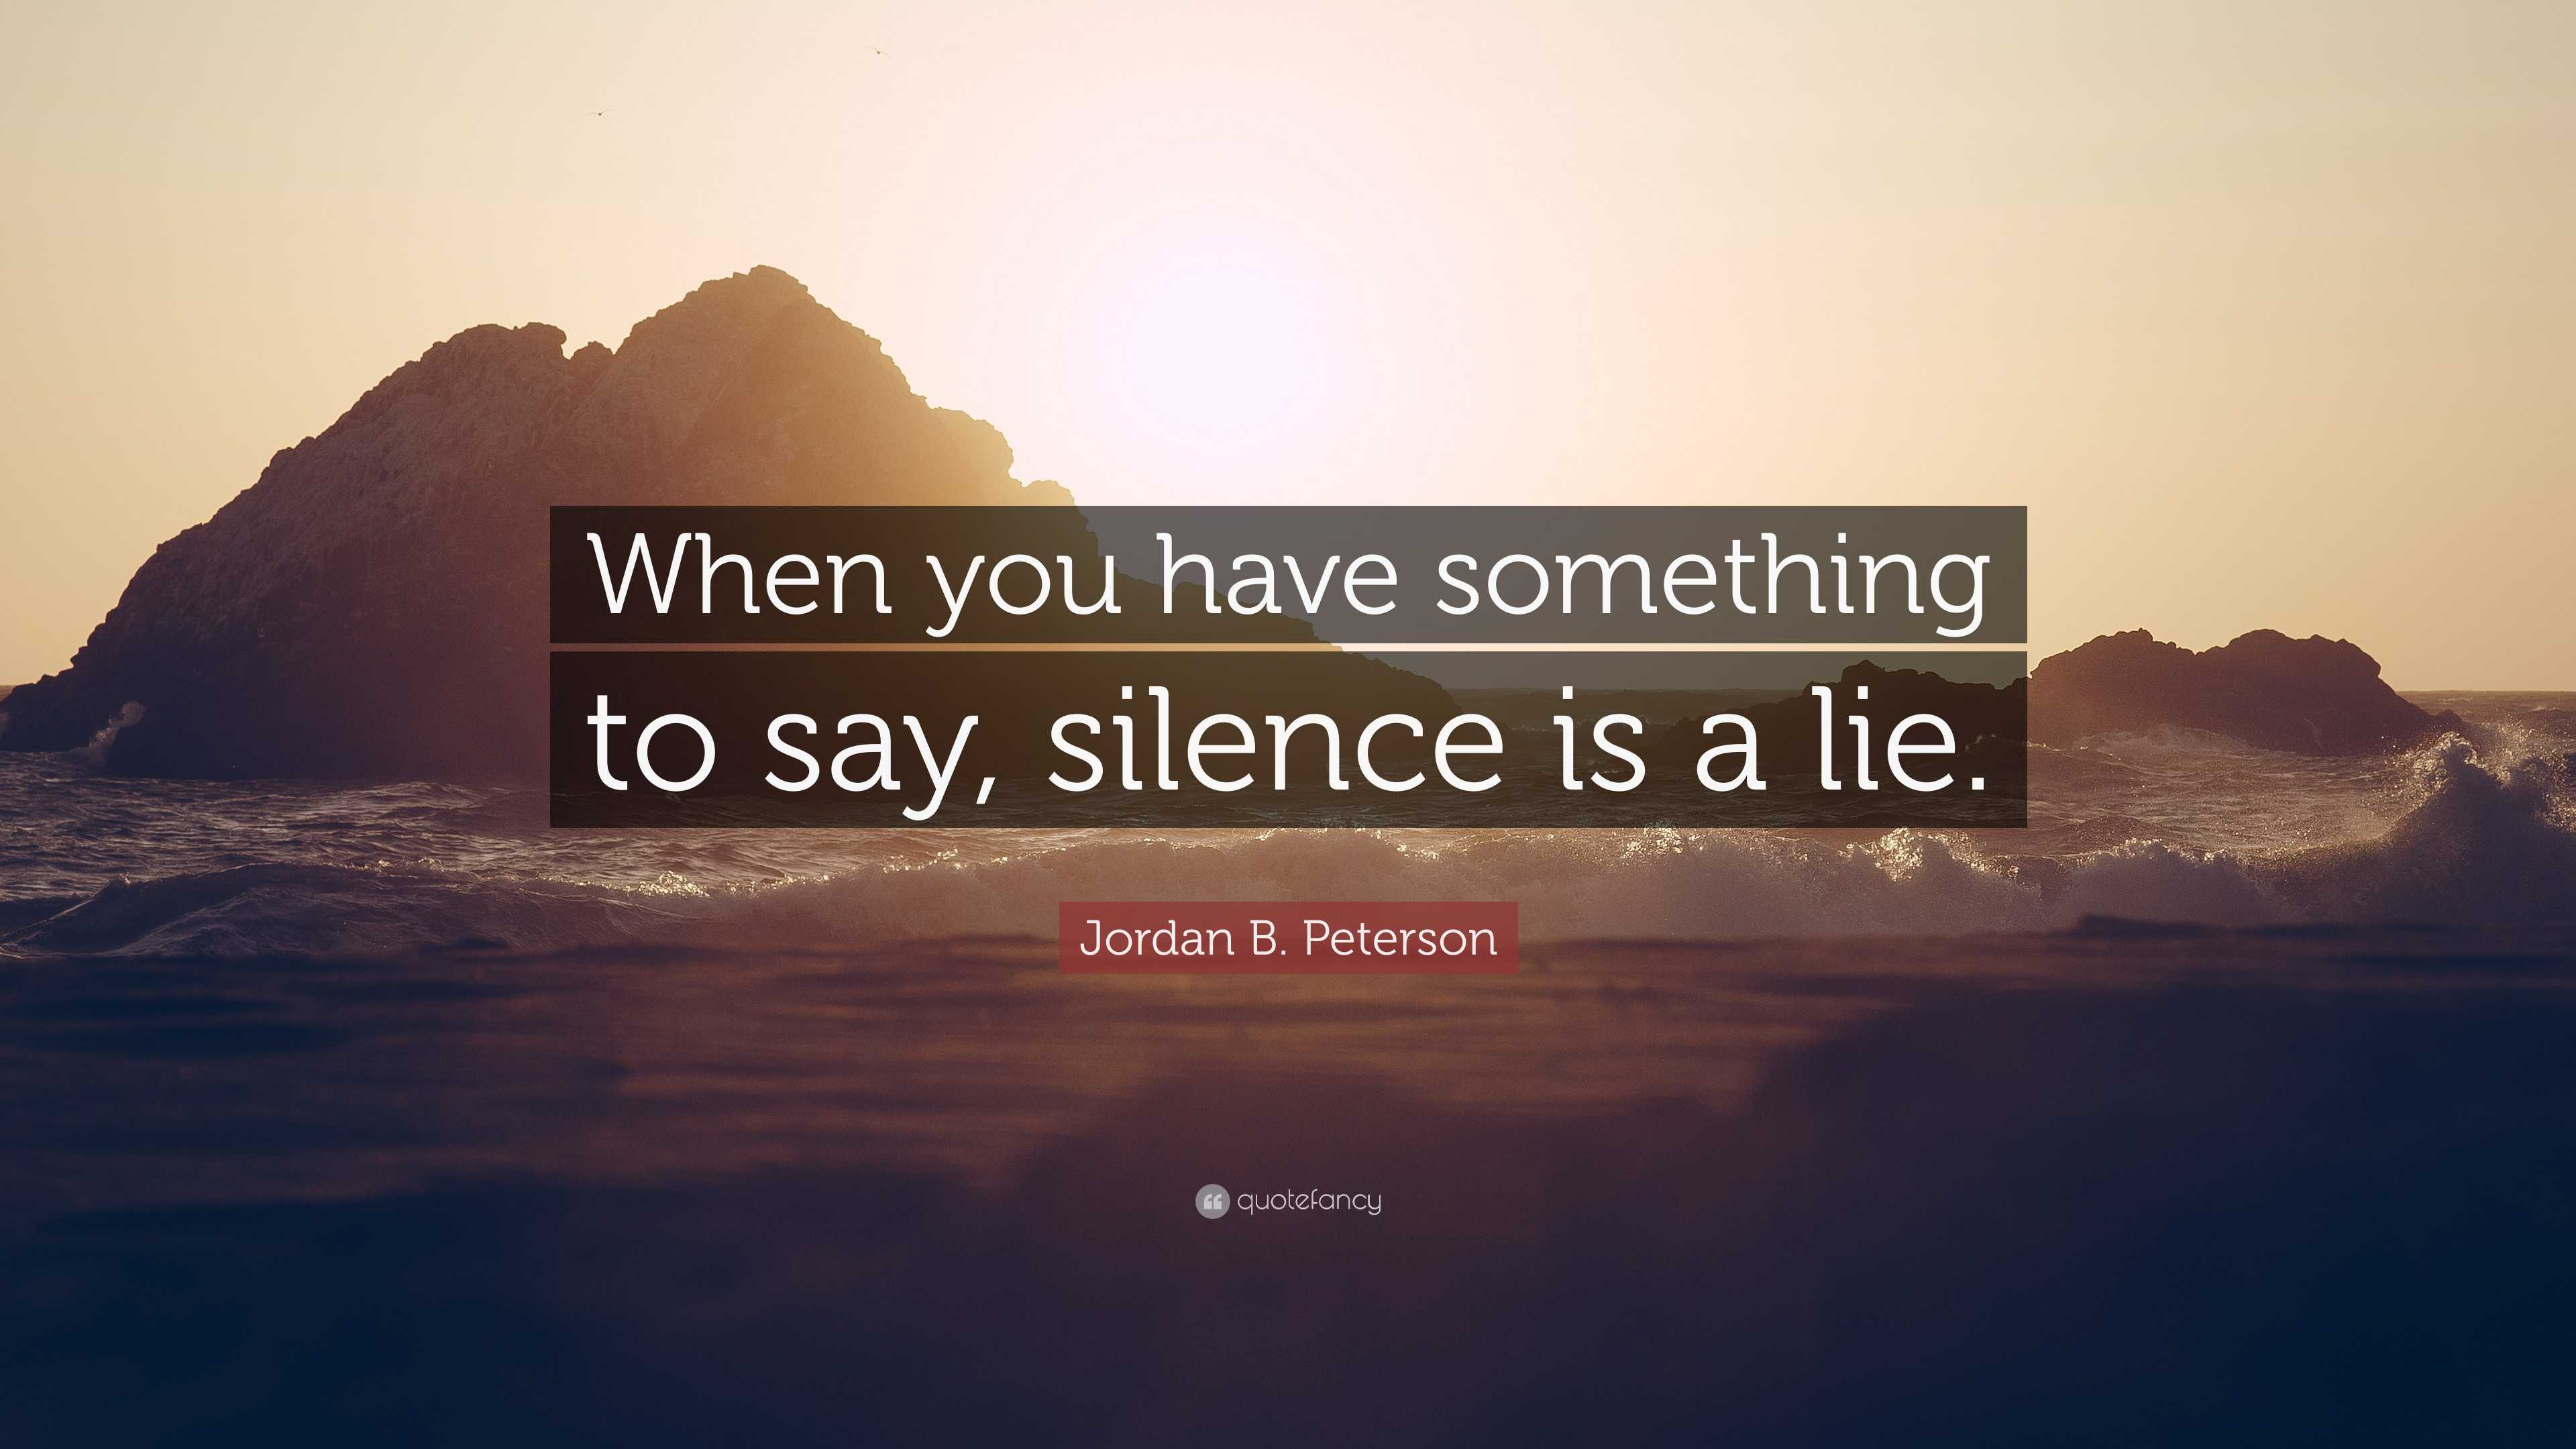 Jordan B. Peterson Quote: “When you have something to say, silence is a ...